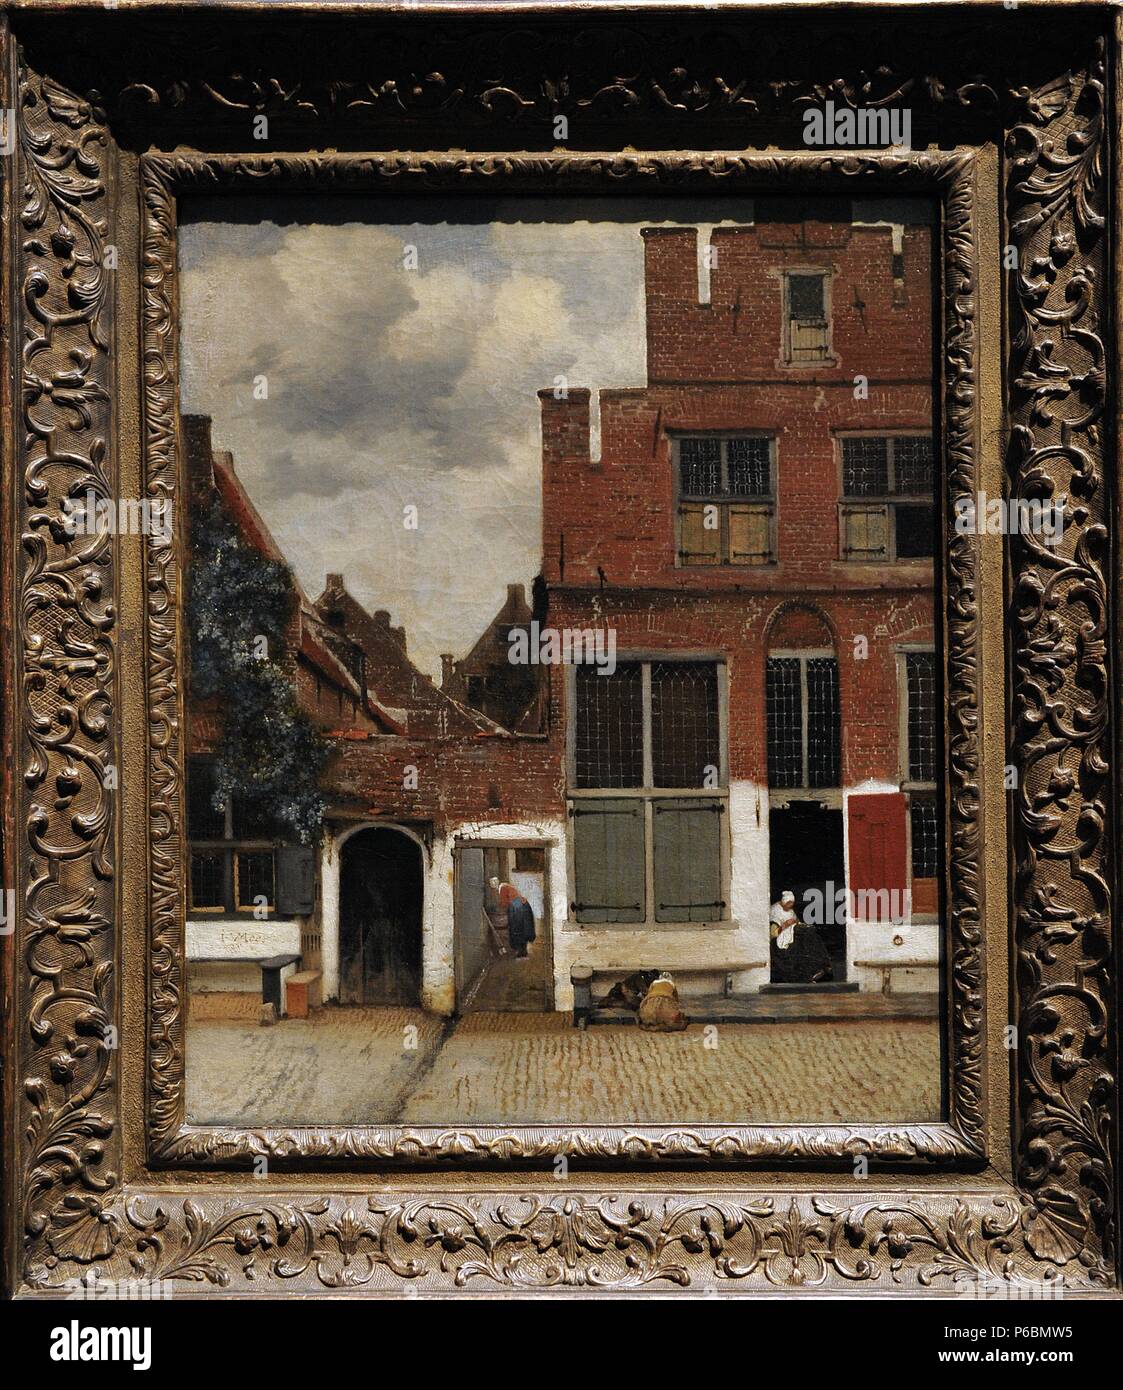 Johannes Vermeer (1632-1675). Dutch painter. View of Houses in Delft, Known as The Little Street, c. 1658. Rijskmuseum. Amsterdam. Netherlands. Stock Photo